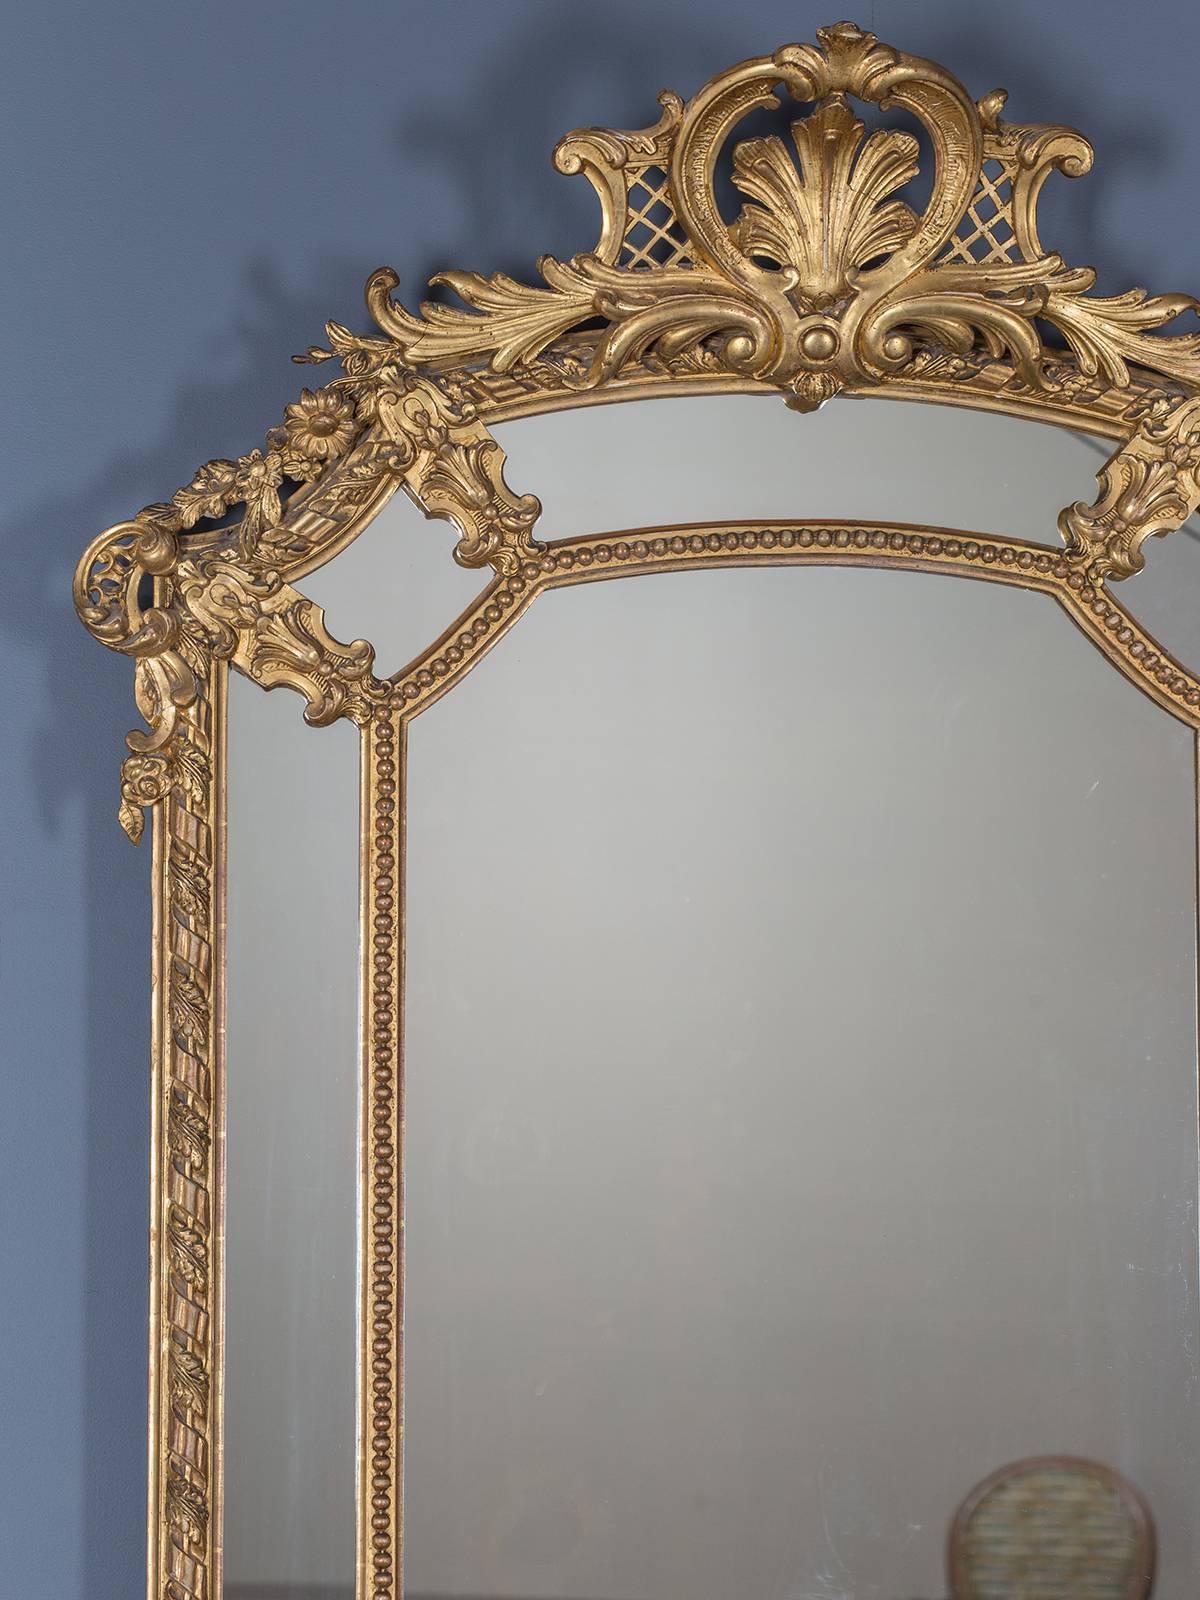 The bold architectural style of this French antique mirror circa 1885 is Régence in style taken from the era when Louis XV was too young to assume the throne of France. The transition in taste from the stately presence of Louis XIV to the lovely